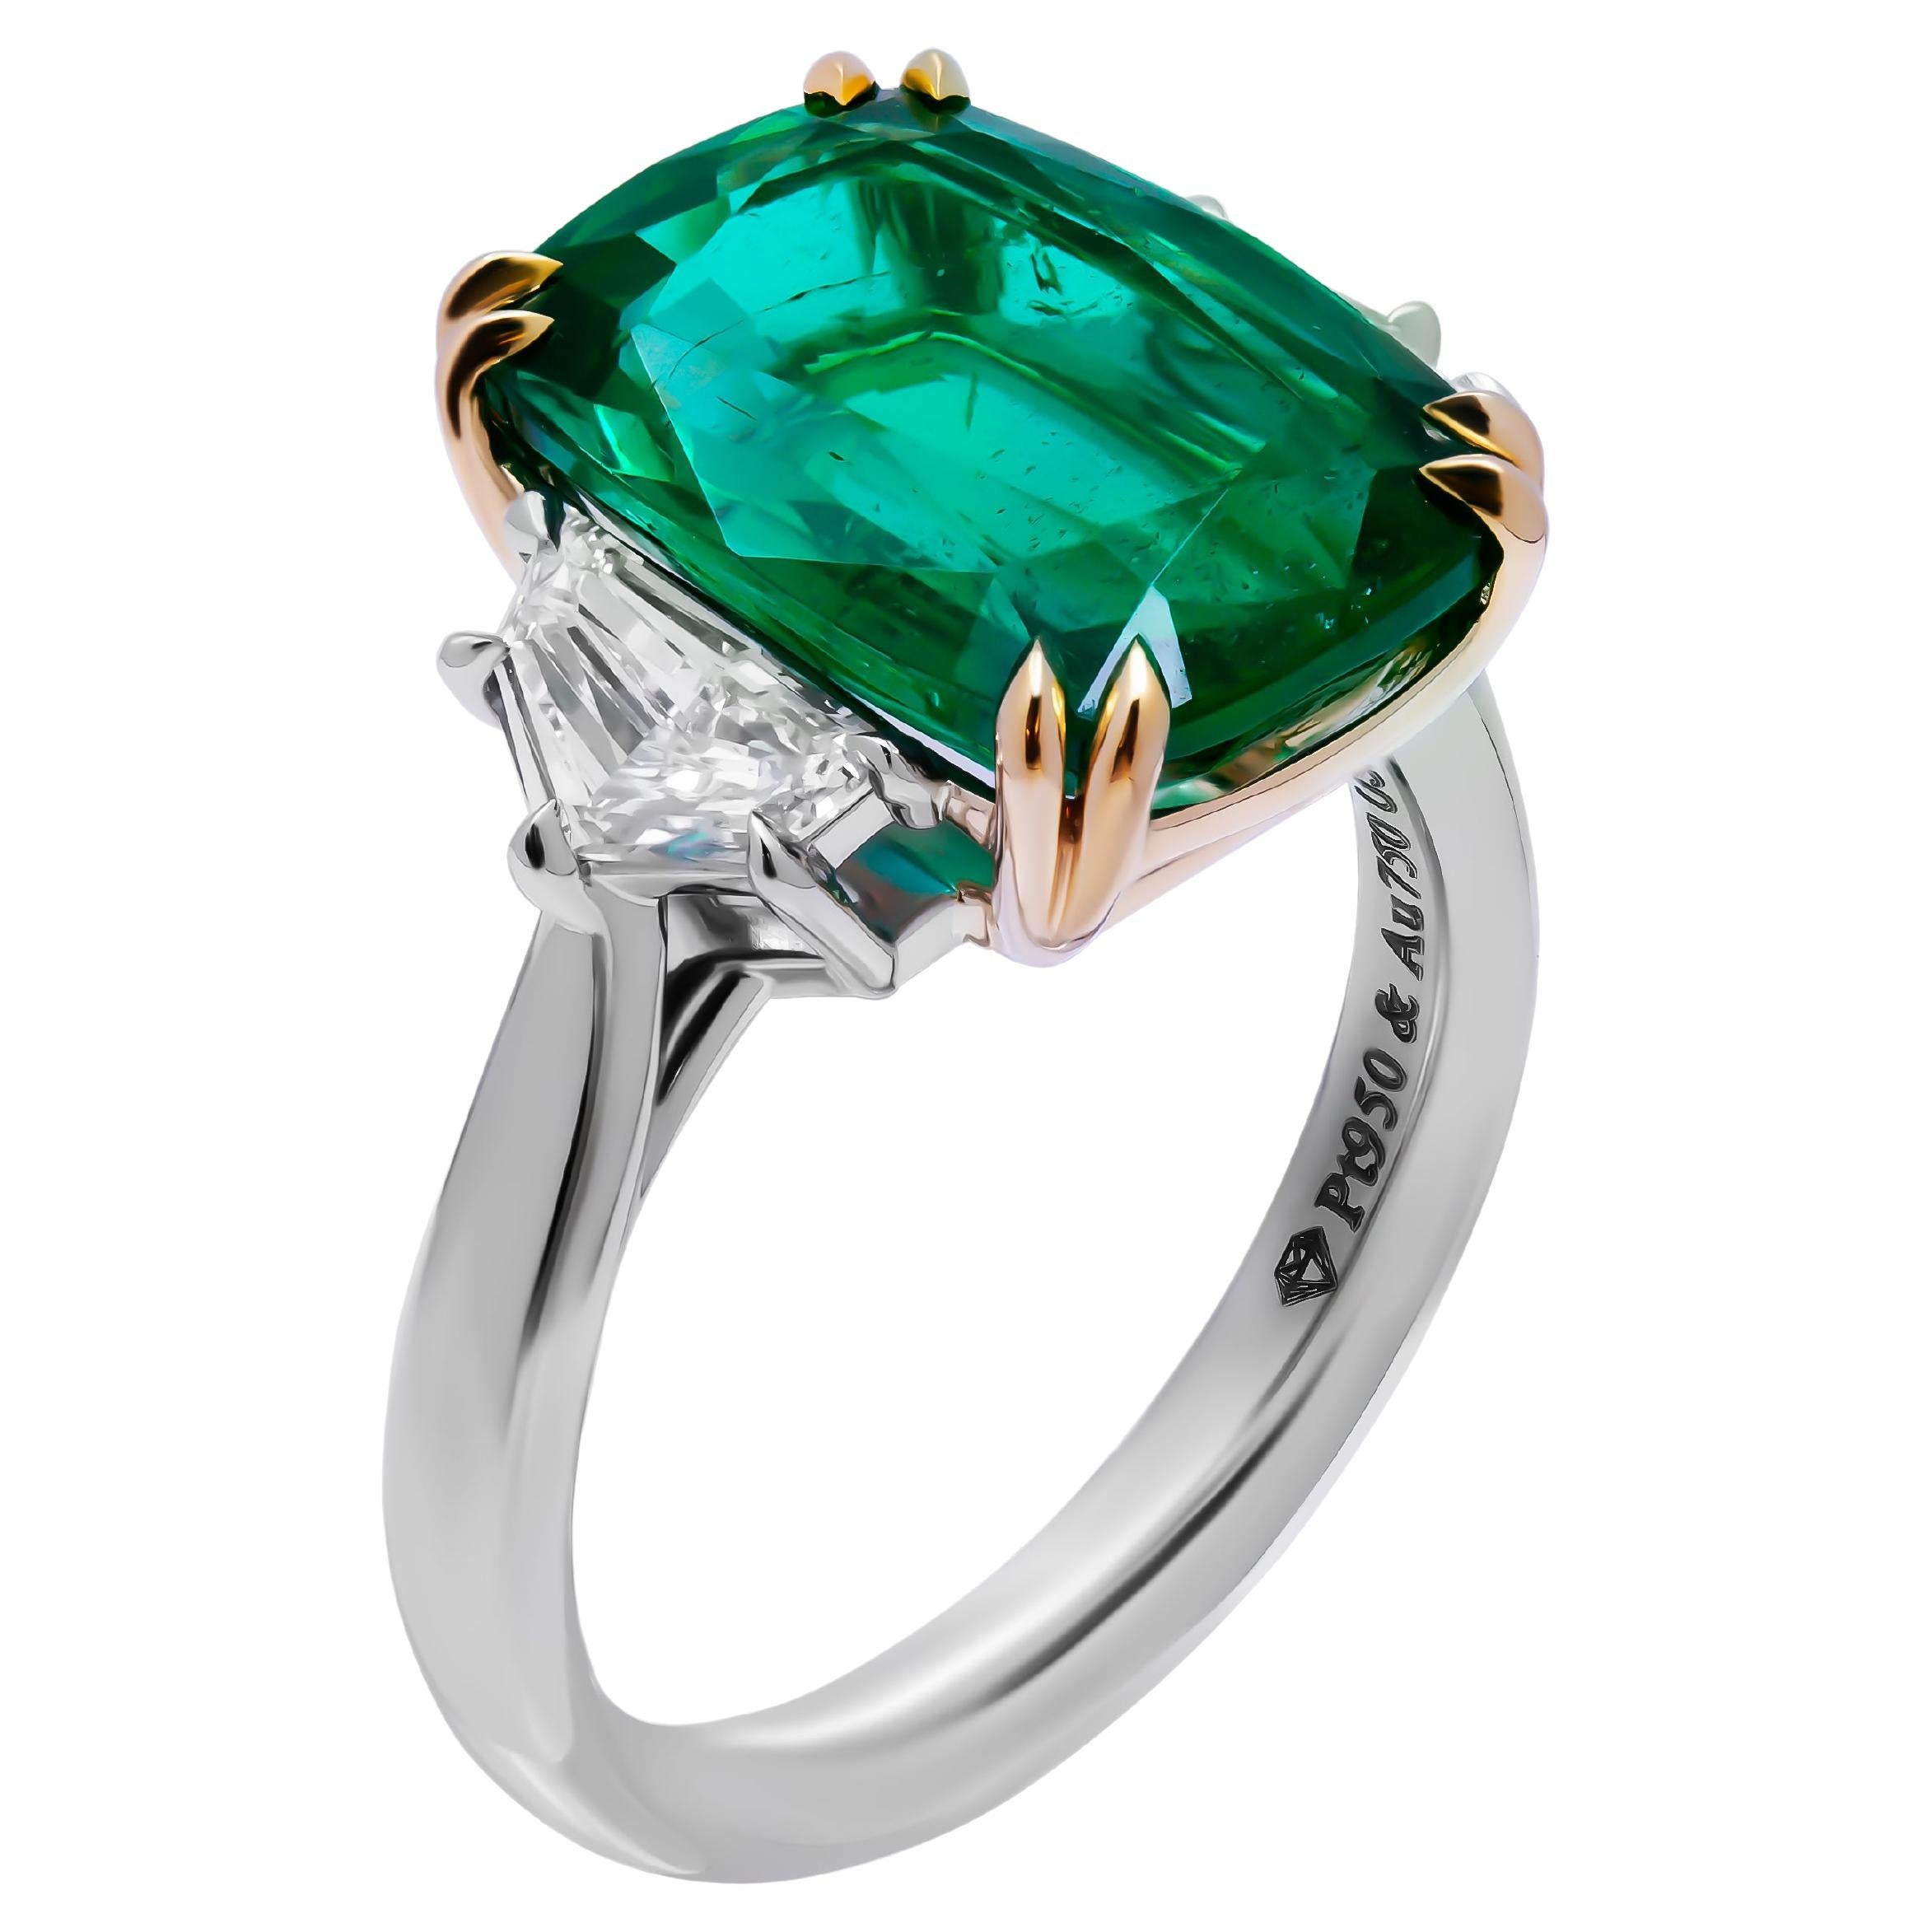 GIA Certified 3 stone ring with 5.03ct Green Emerald Cushion Cut